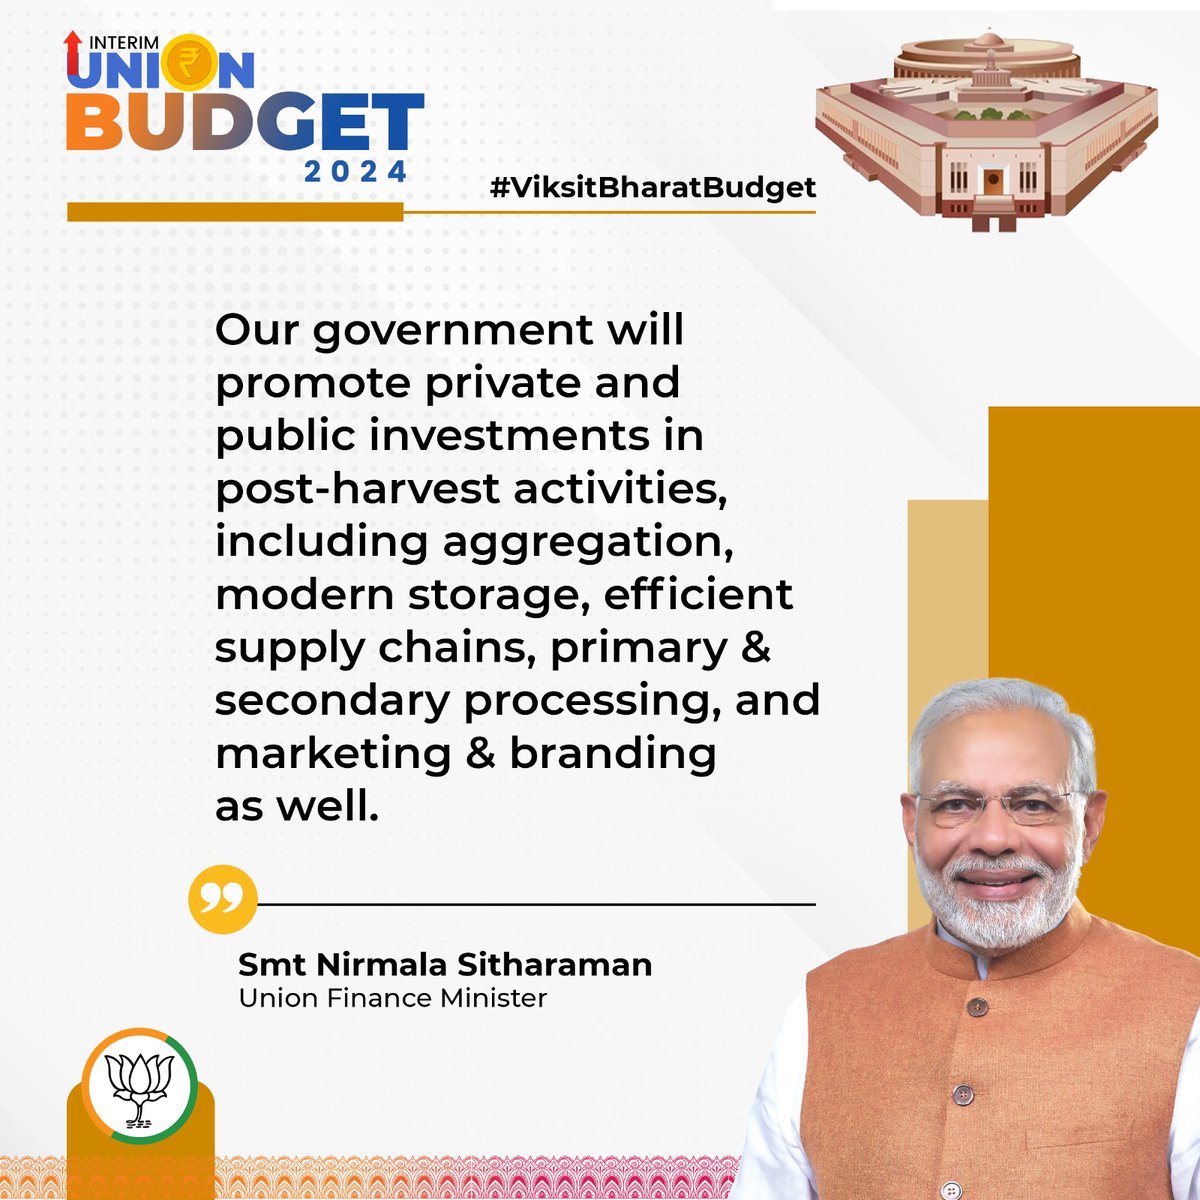 Our government will promote private and public investments in post-harvest activities, including aggregation, modern storage, efficient supply chains, primary & secondary processing, and marketing & branding as well.

- FM Smt. @nsitharaman 

#ViksitBharatBudget